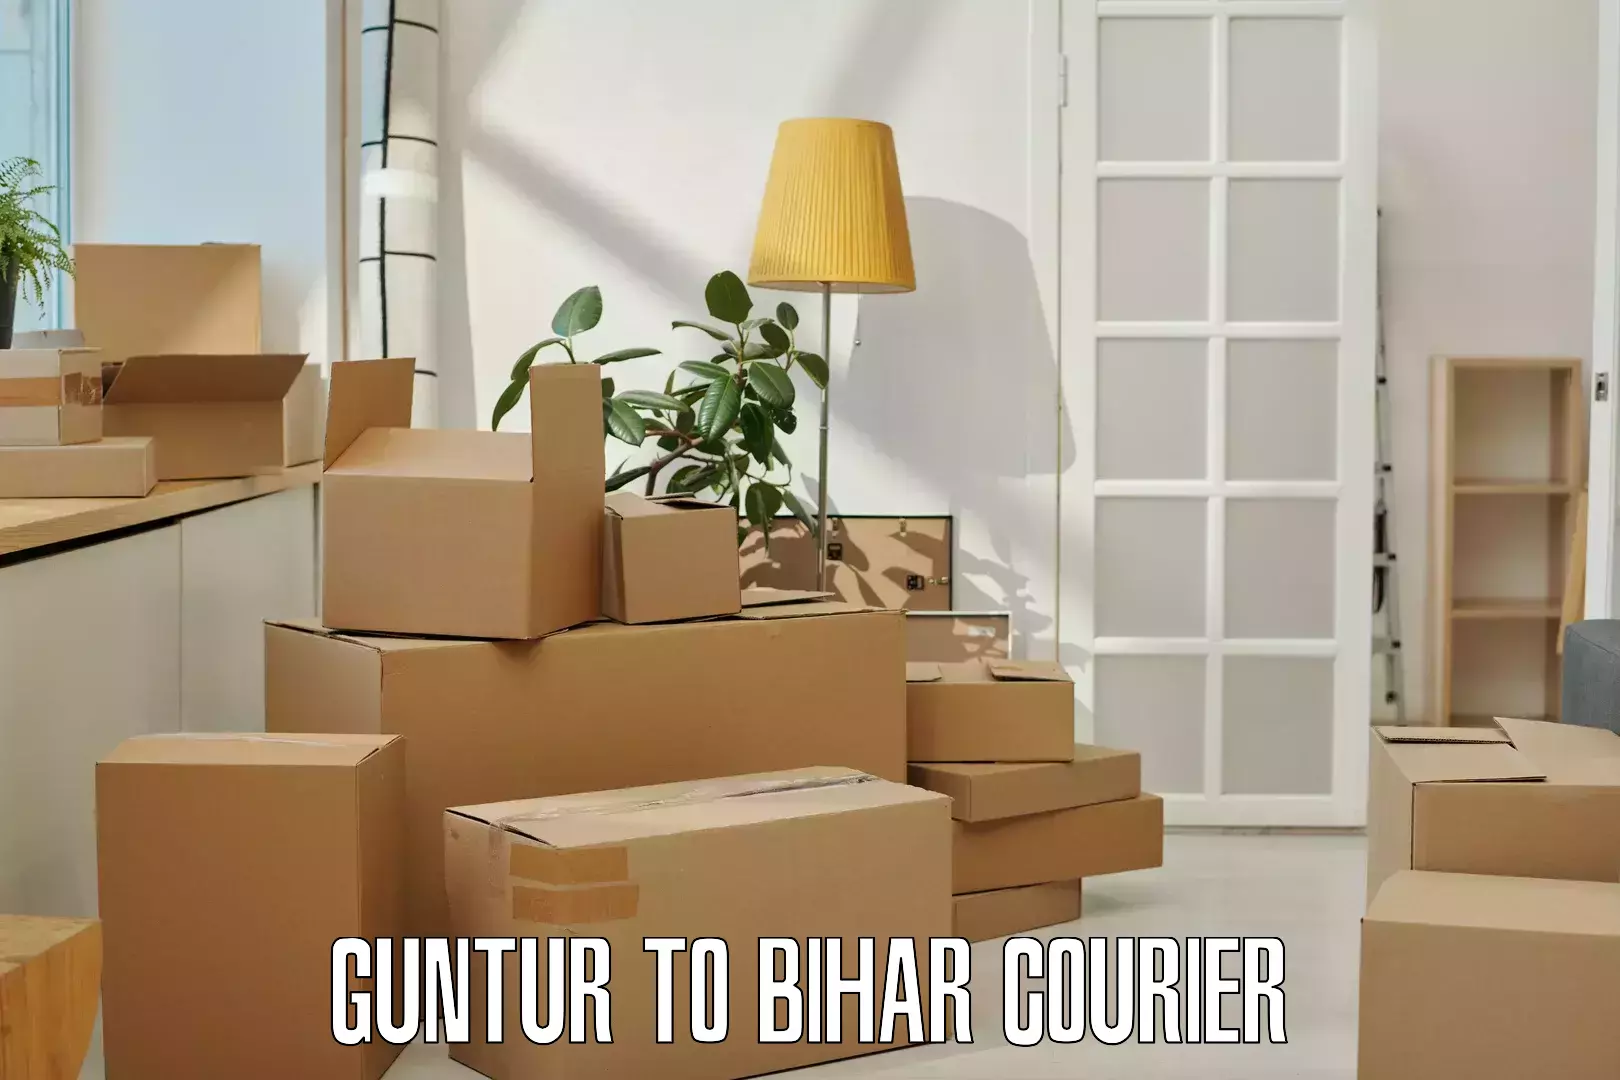 Same-day delivery solutions Guntur to Bihar